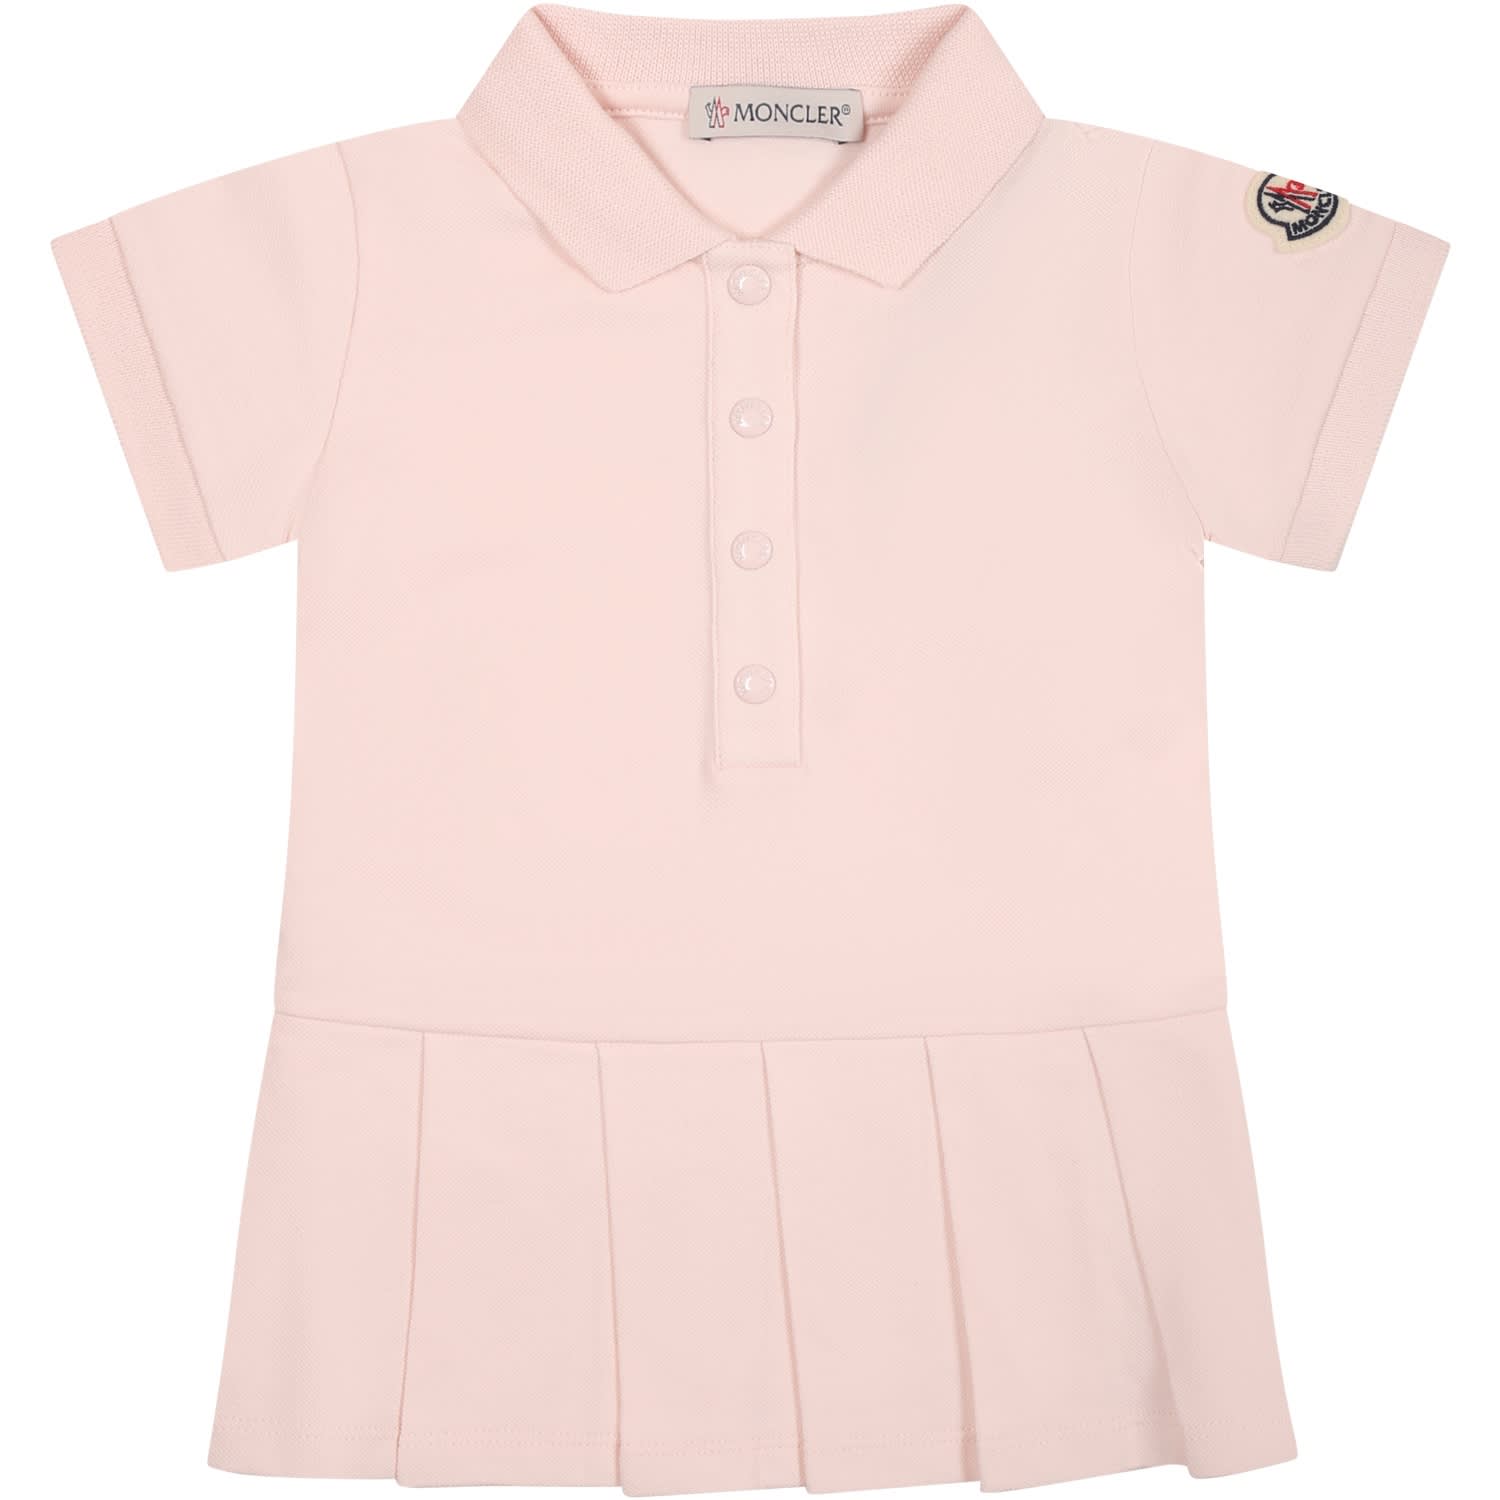 Moncler Pink Dress For Baby Girl With Logo